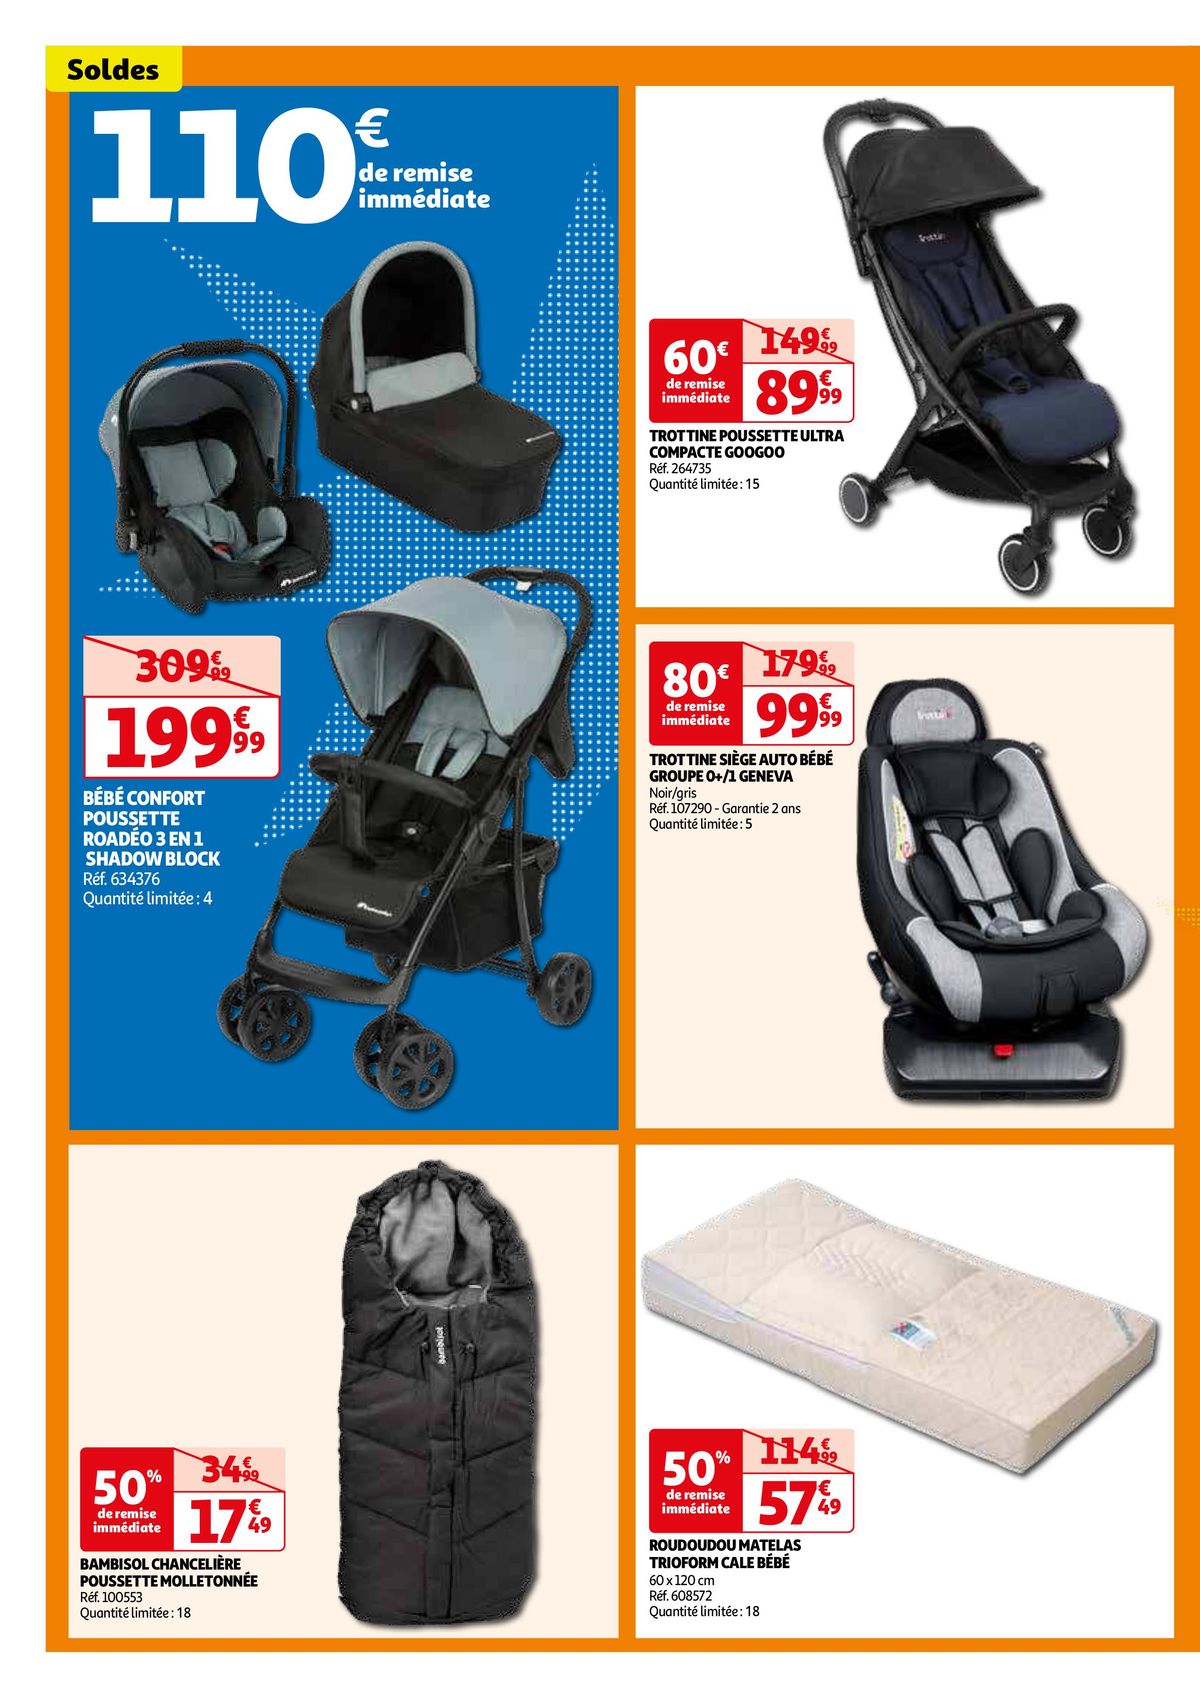 Catalogue SOLDES AUCHAN ENGLOS, page 00004